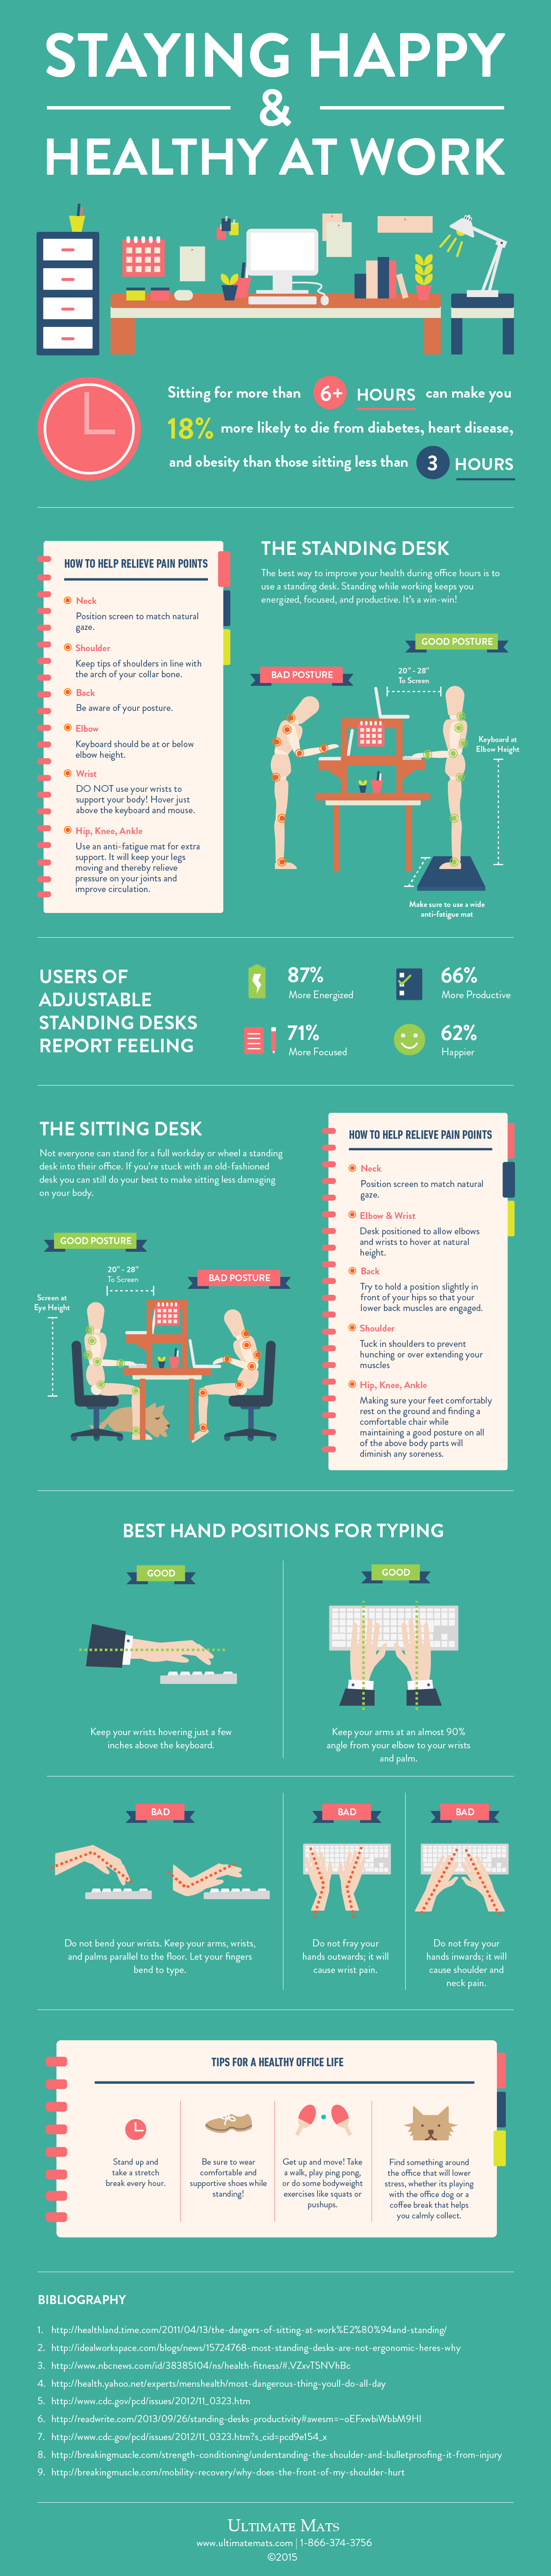 Tips For Pain Free Posture At Work | Daily Infographic